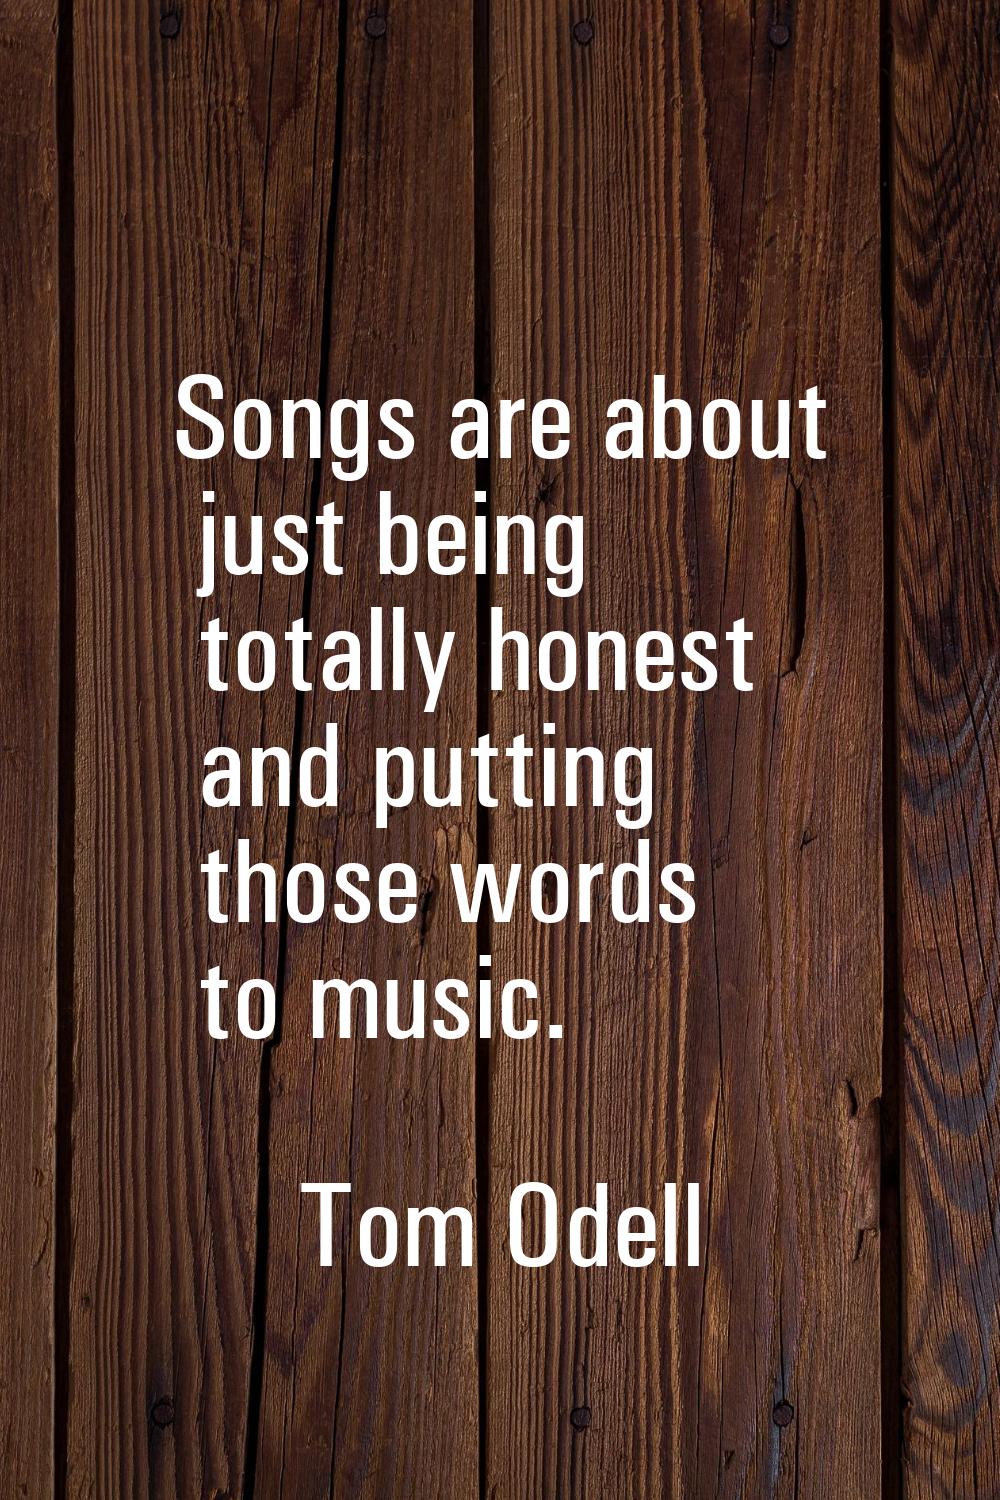 Songs are about just being totally honest and putting those words to music.